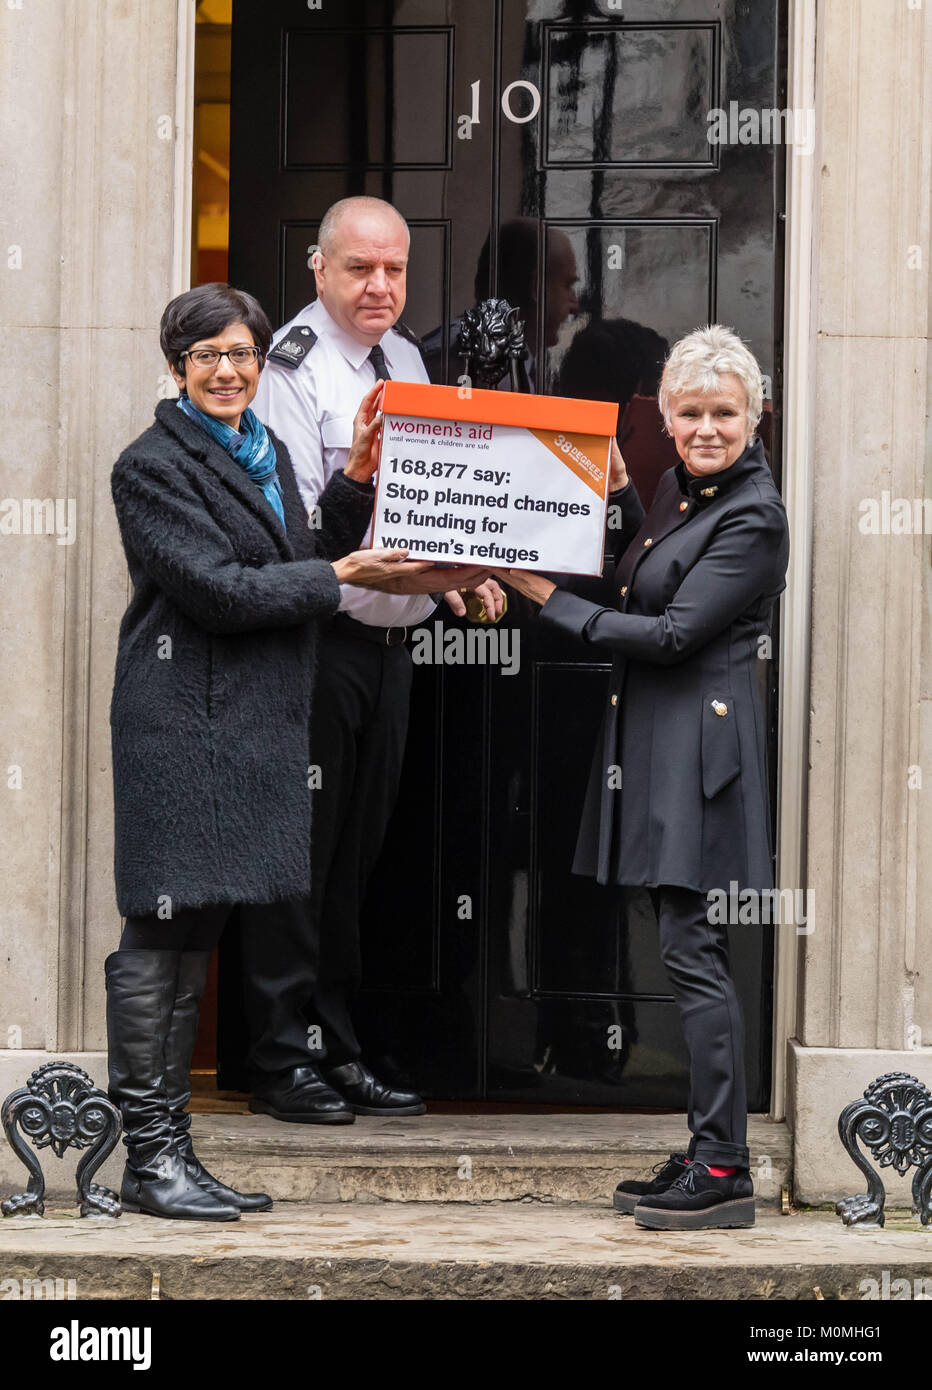 London, 23rd January 2018, Dame Julie Walters, actress and writer  arrives in Downing Street to present a Woman's Aid petition against proposed changes in funding for Women's refuges. Credit: Ian Davidson/Alamy Live News Stock Photo